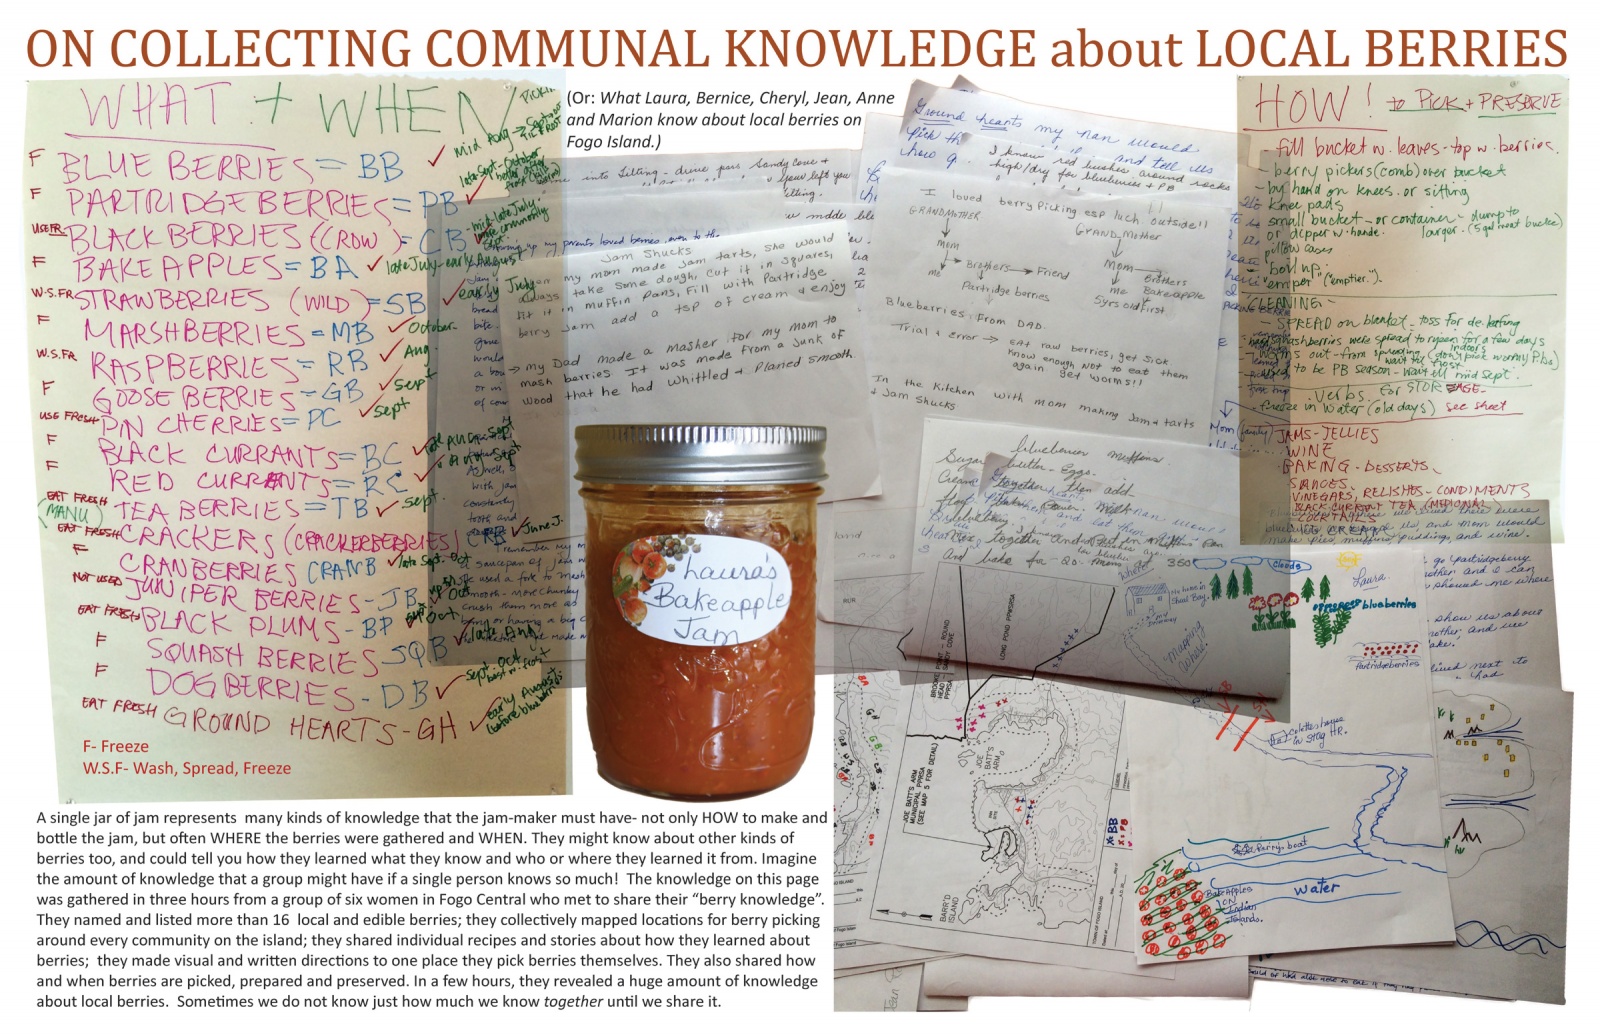 On Collecting Communal Knowledge about Local Berries